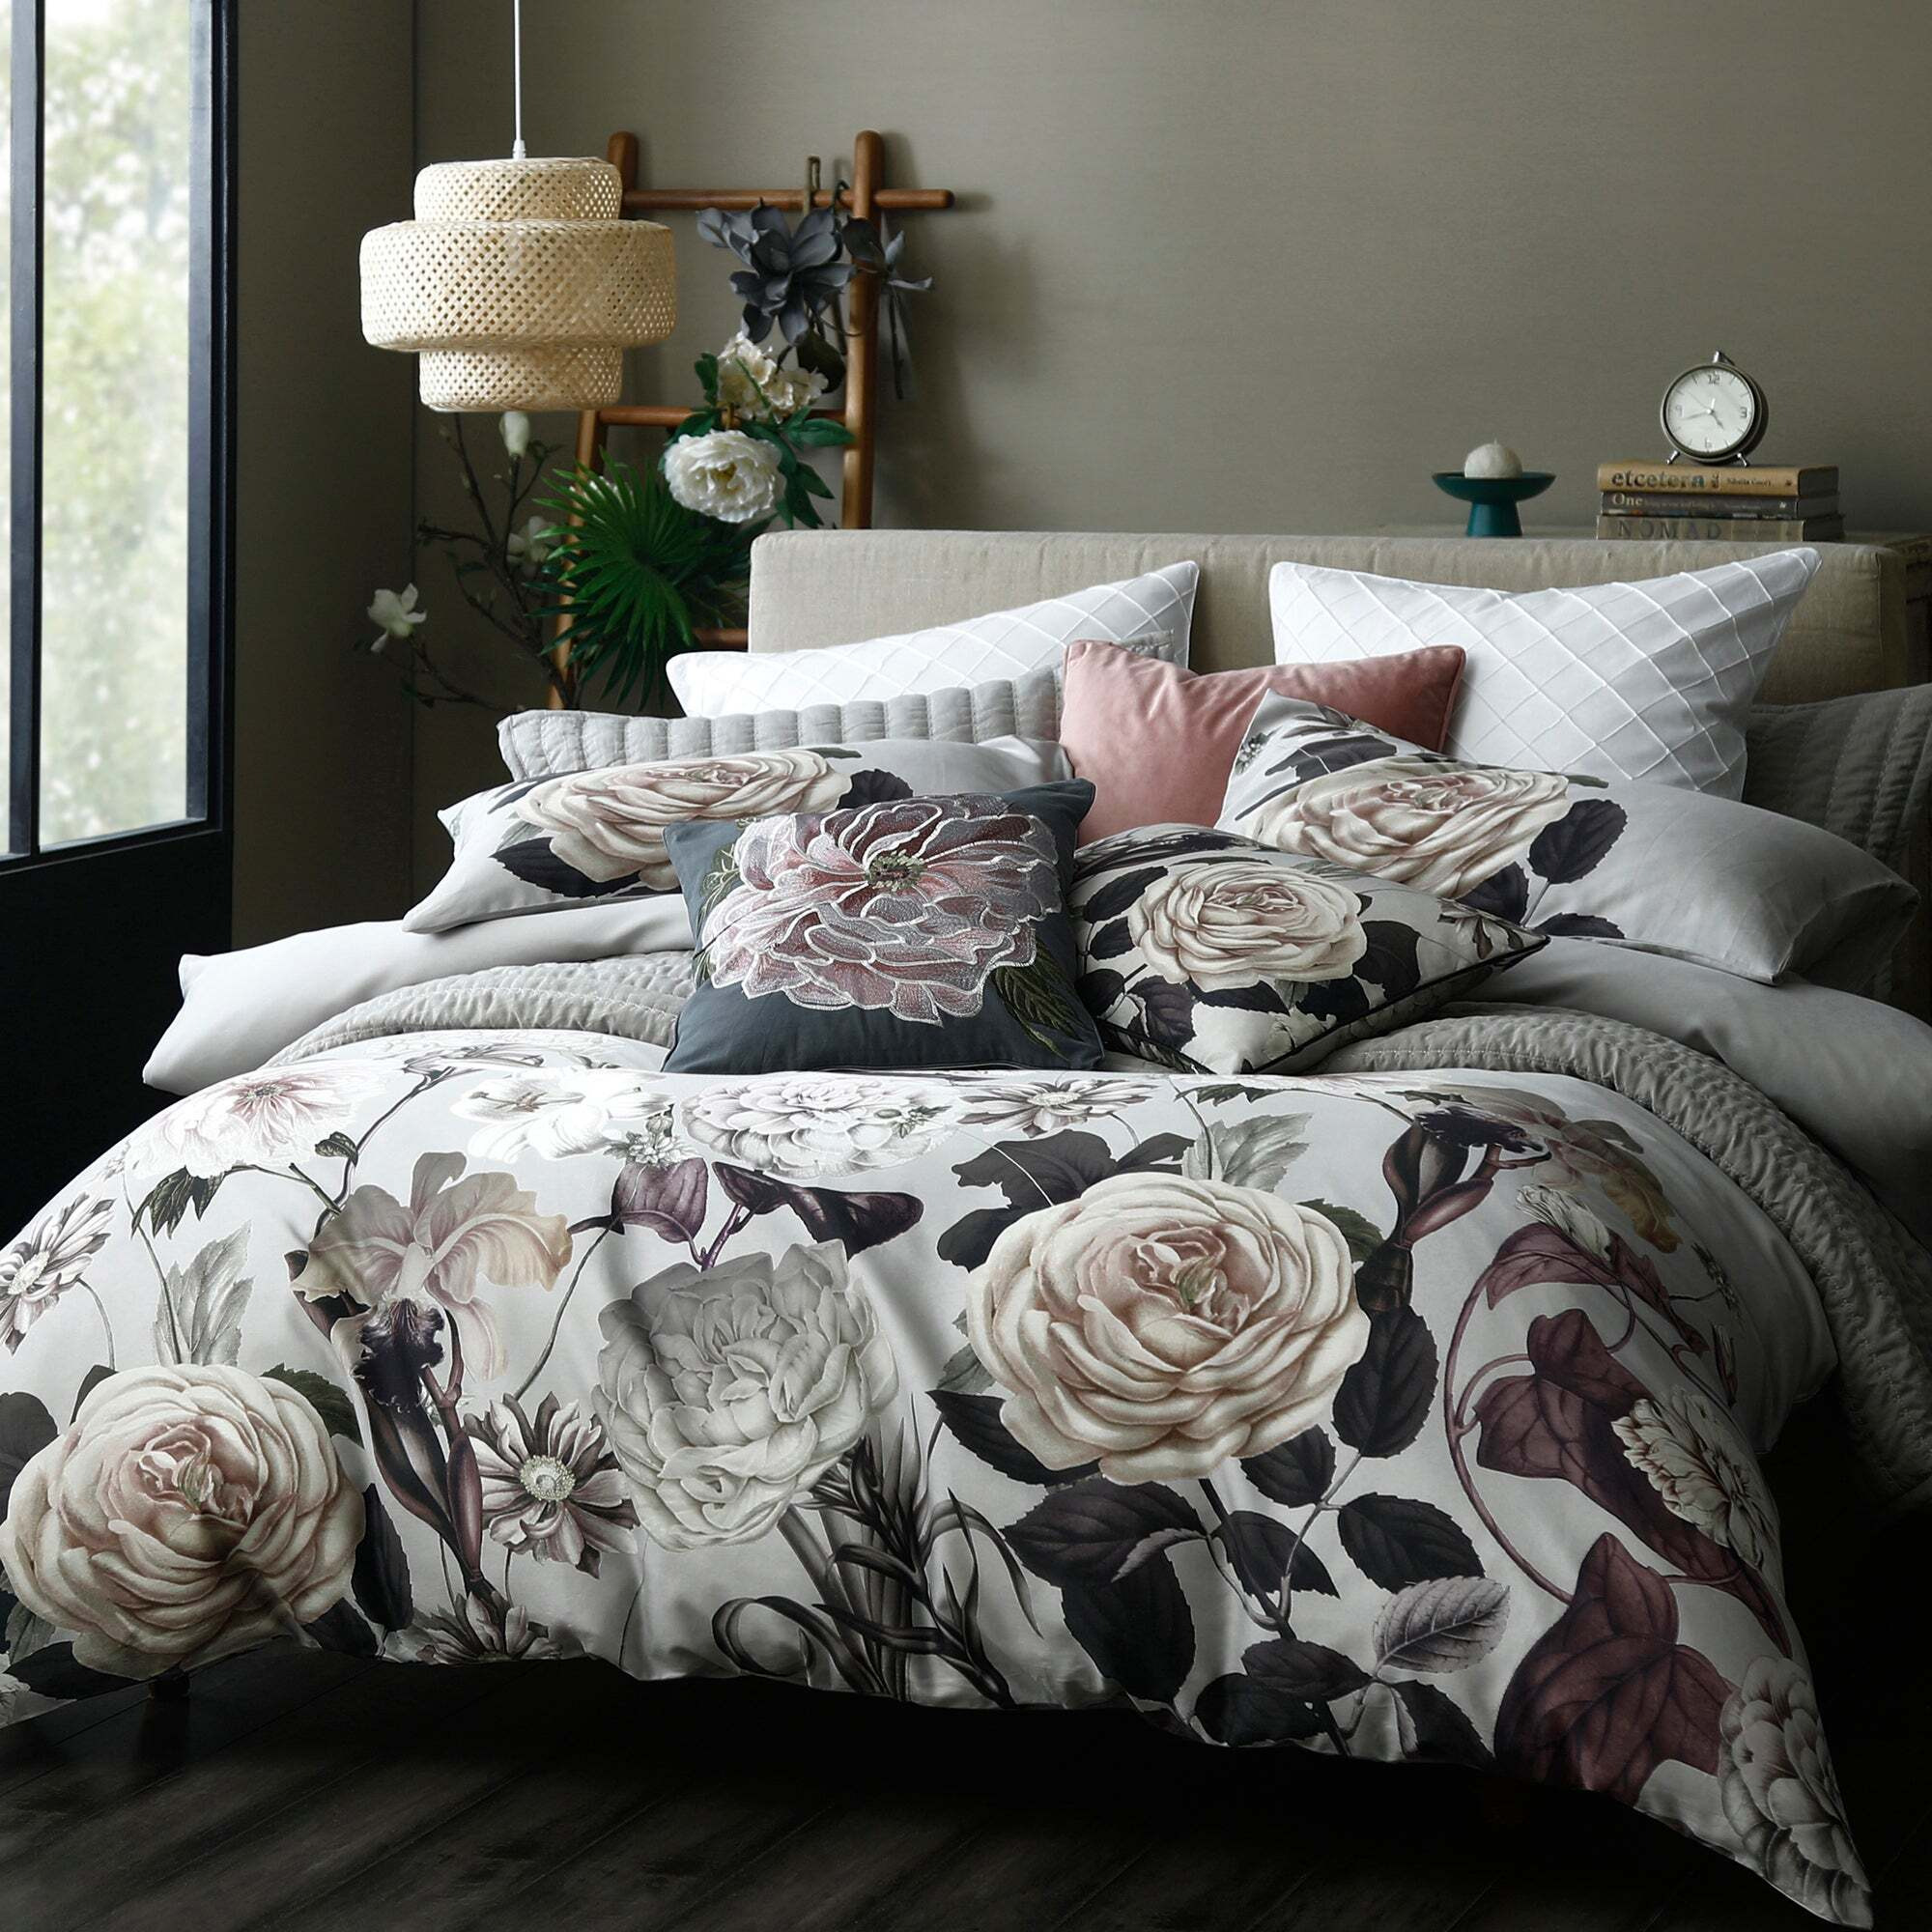 Avery Green Amalia Floral 100% Cotton Sateen Duvet Cover and Pillowcase Set Pink/Black/White